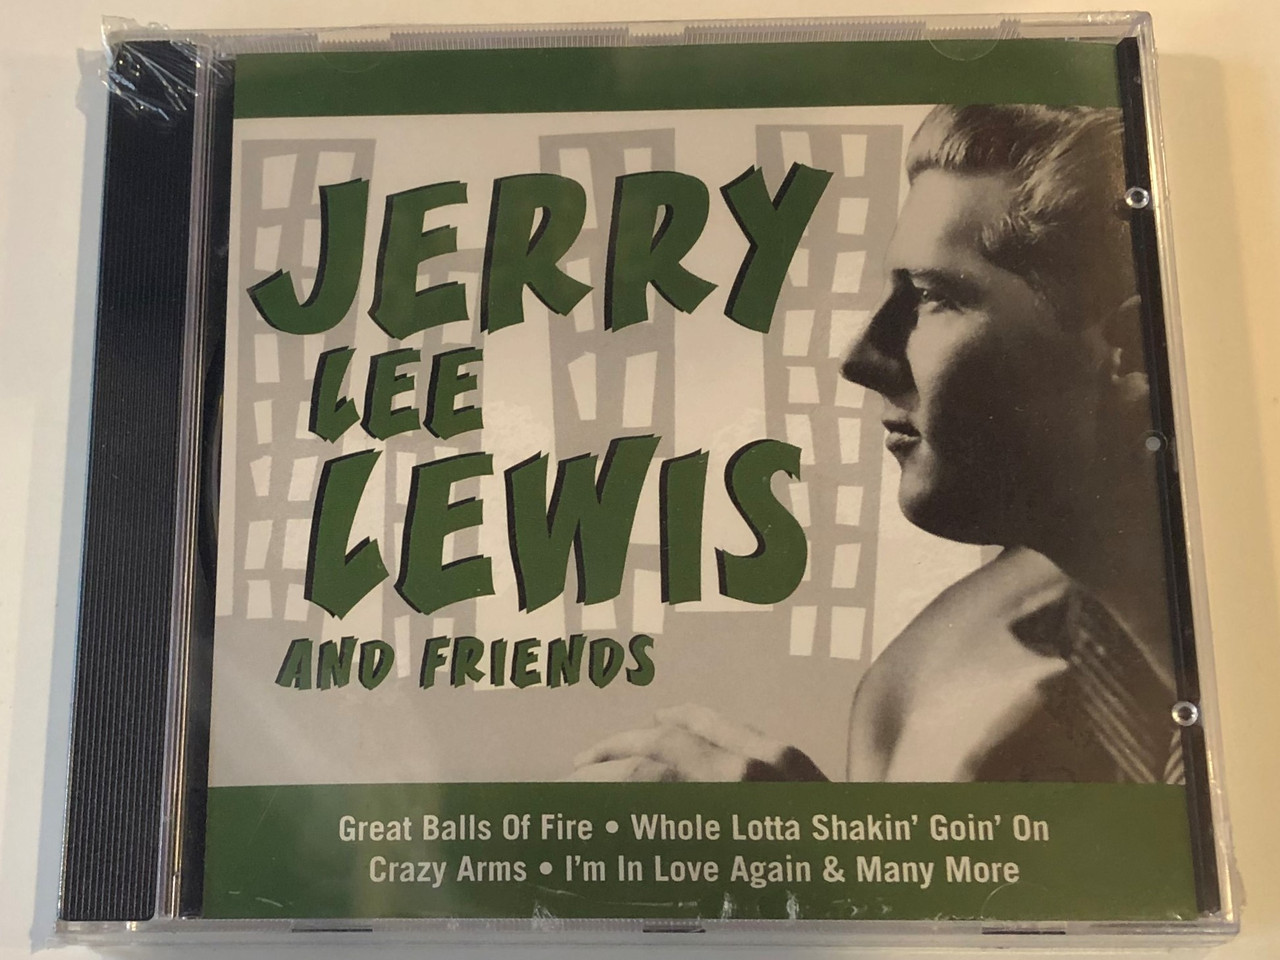 Jerry Lee Lewis And Friends / Great Balls Of Fire, Whole Lotta Shakin'  Goin' On, Crazy Arms, I'm In Love Again & Many More / Fox Music Audio CD /  FU 1035 - bibleinmylanguage